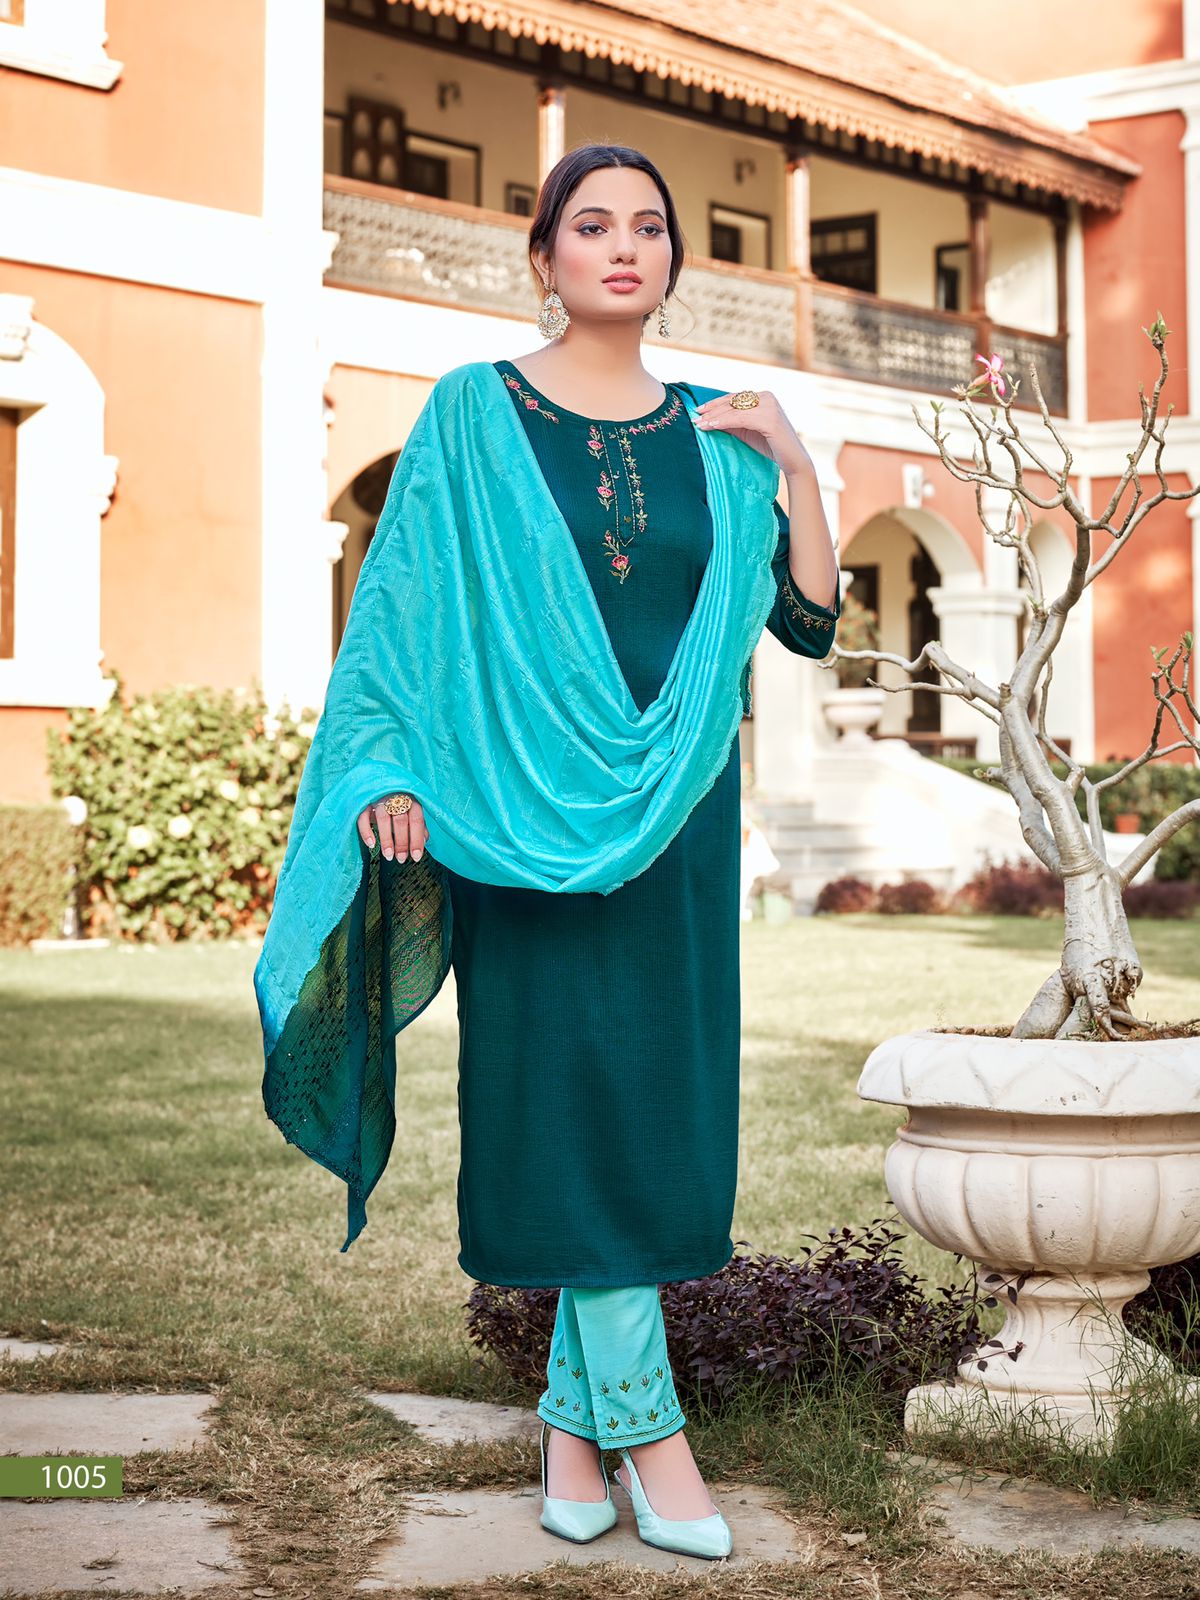 ladyview geet gorgeous look top pant with dupatta catalog